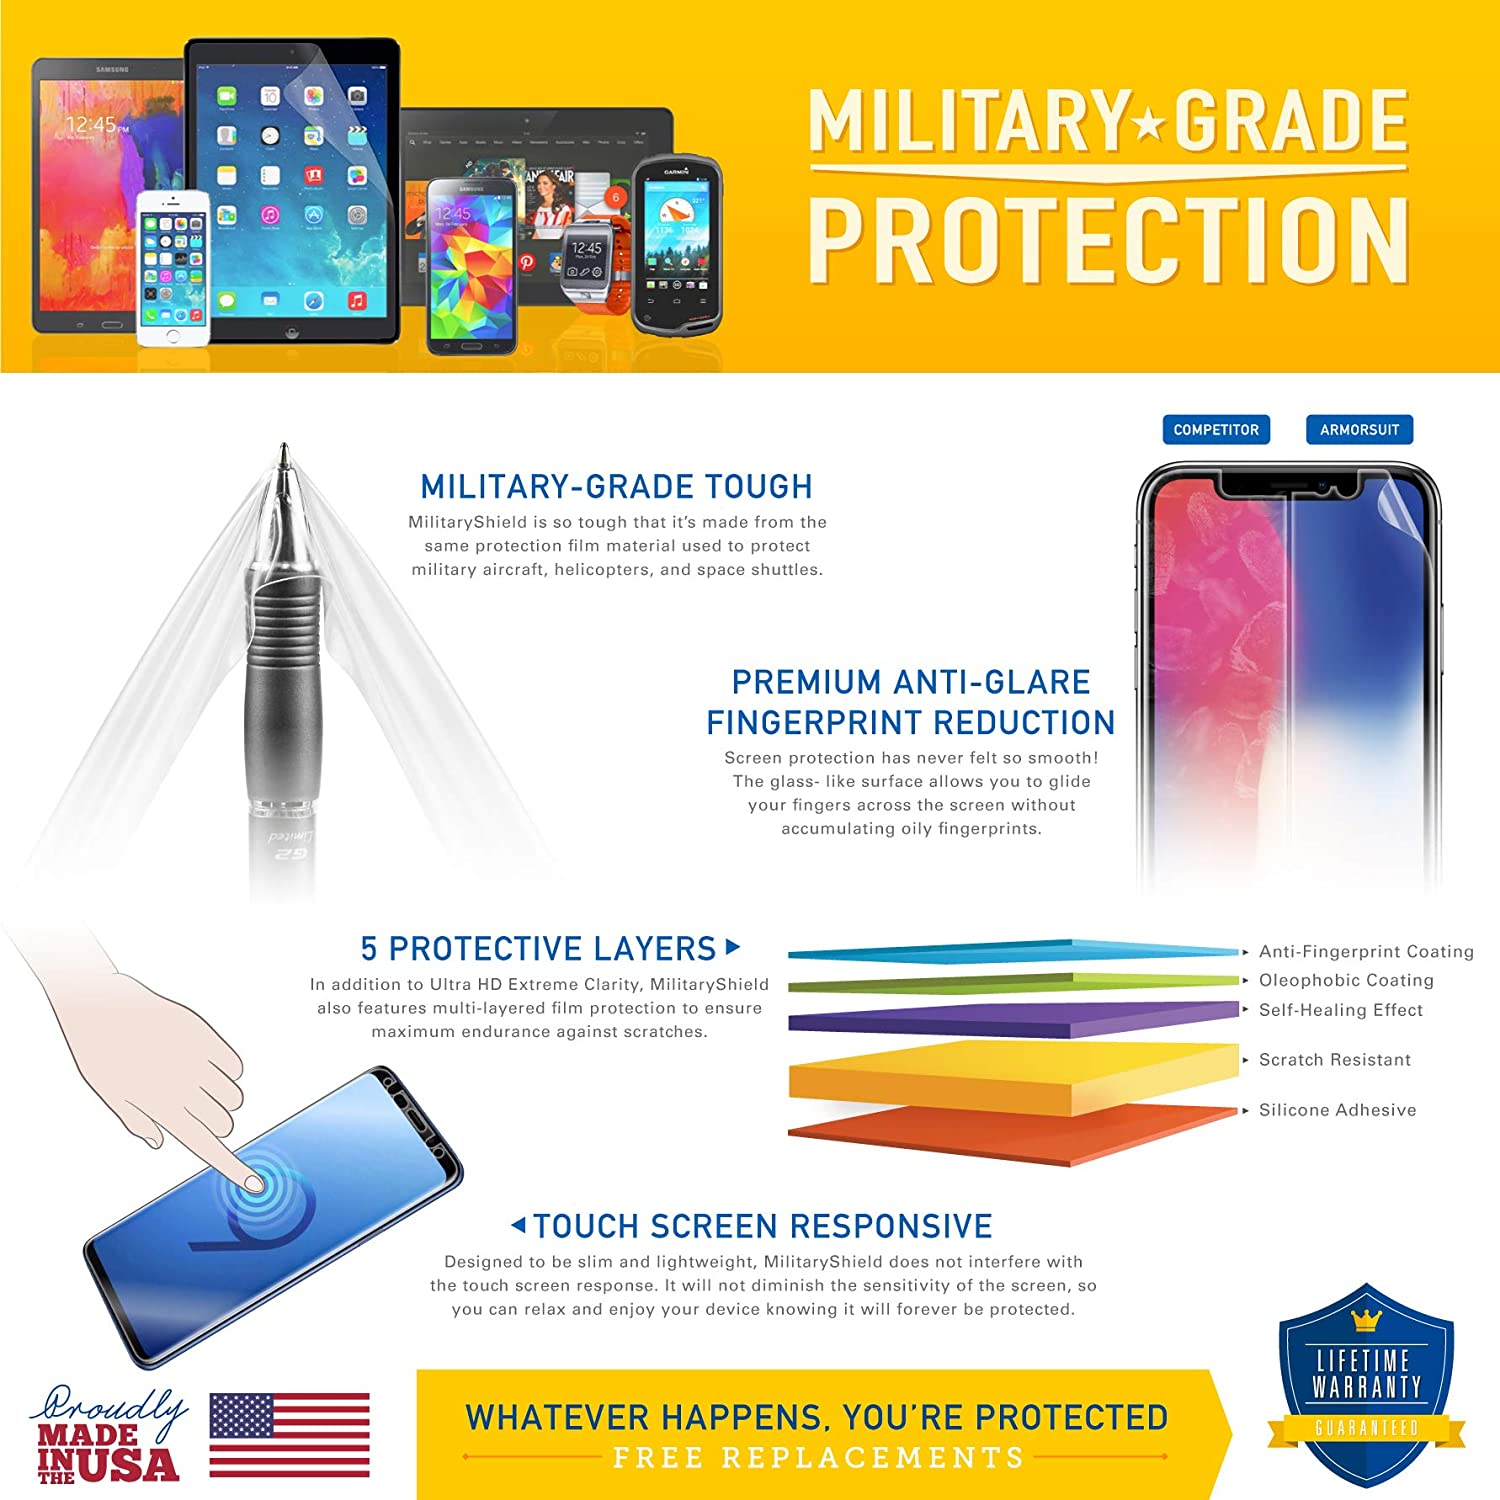 [2-Pack] Samsung Galaxy Note 5 Screen Protector